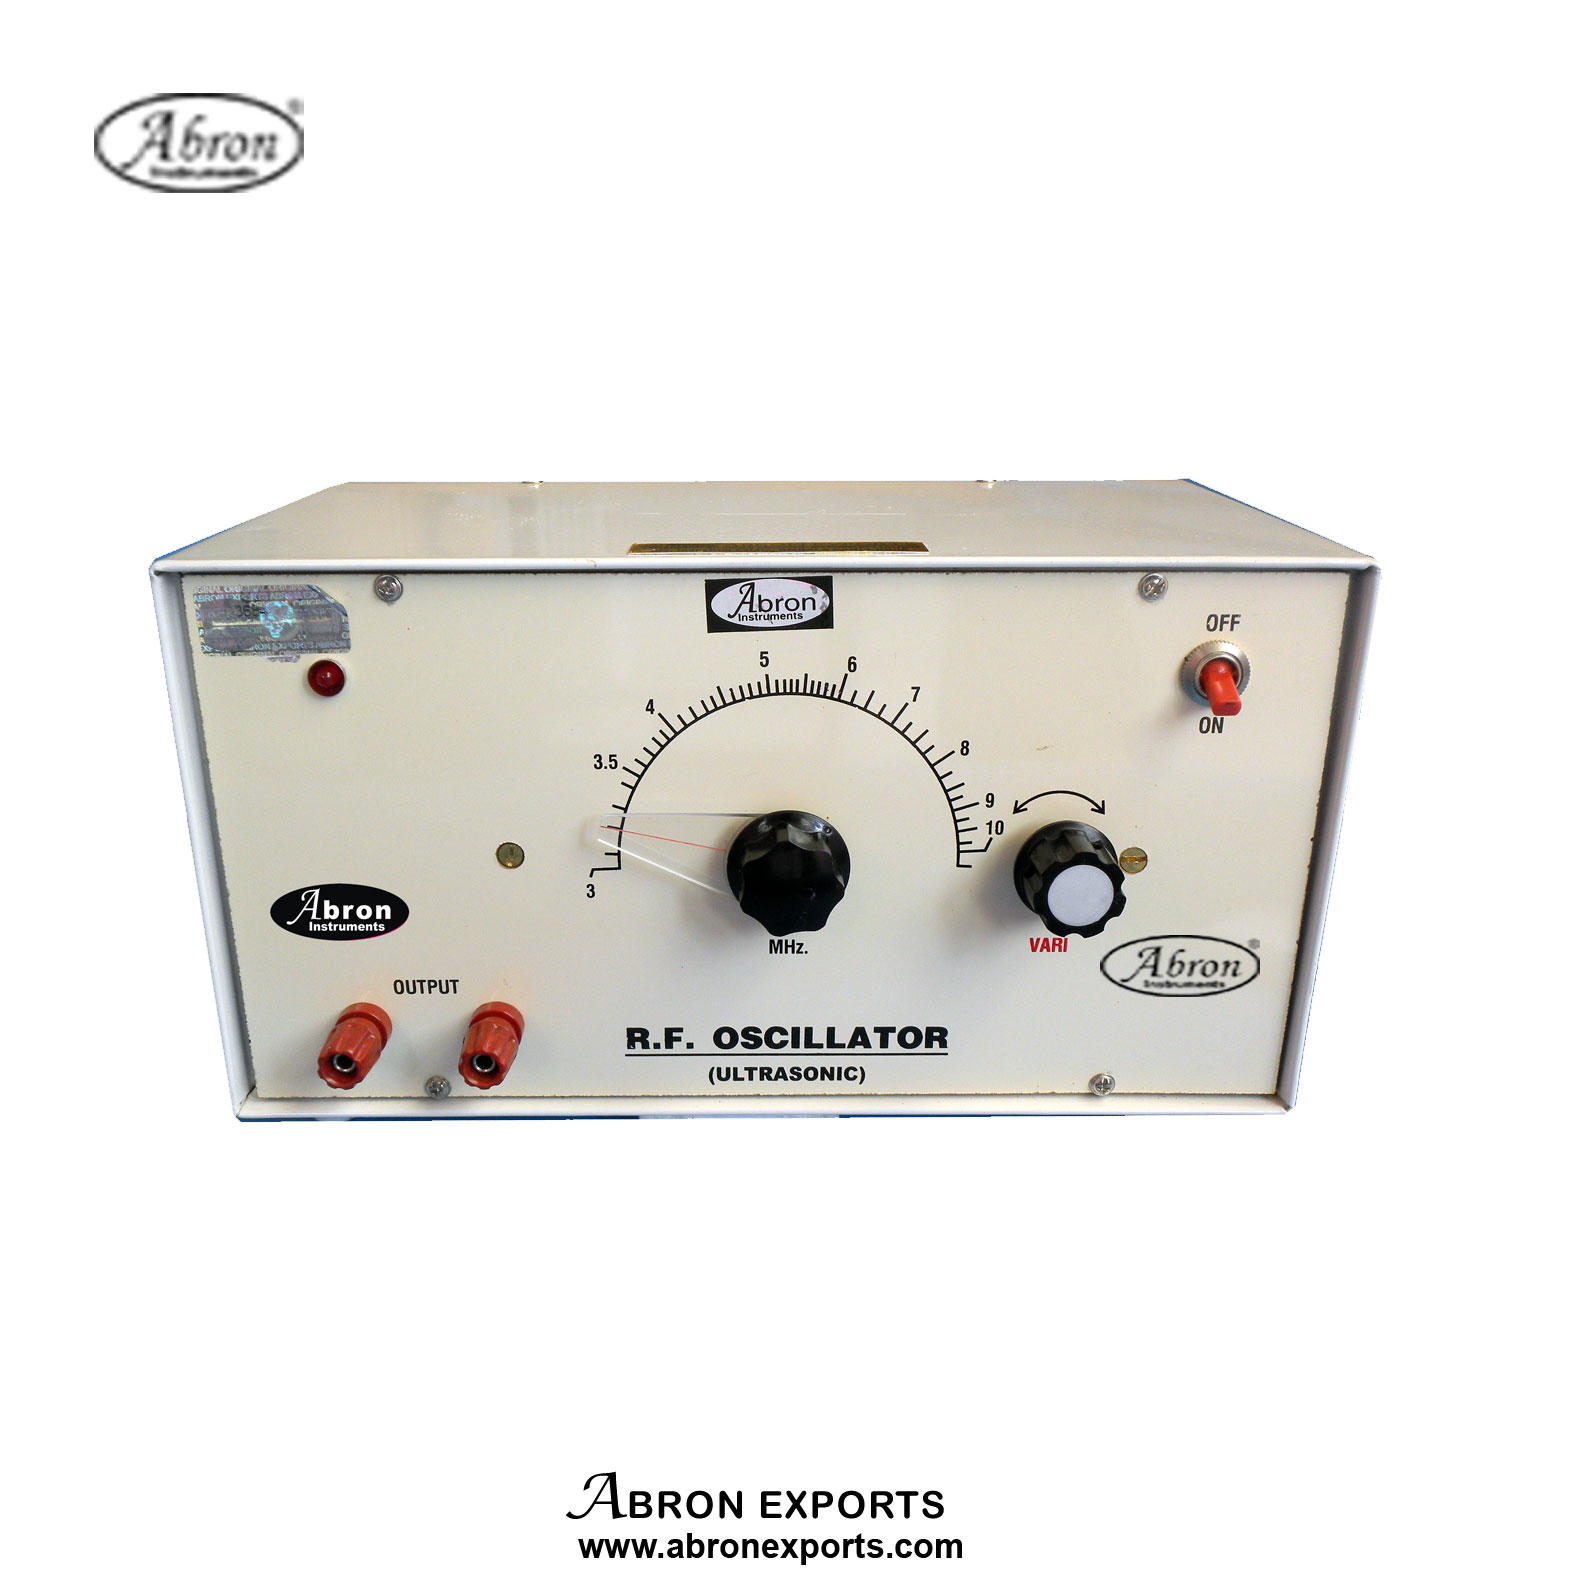 RF Oscillator Generator 3MHz -8MHz dial Type Variable for ultrasonic use power supply in box Radio Frequency Oscillator AE-1355A AE-1442RF